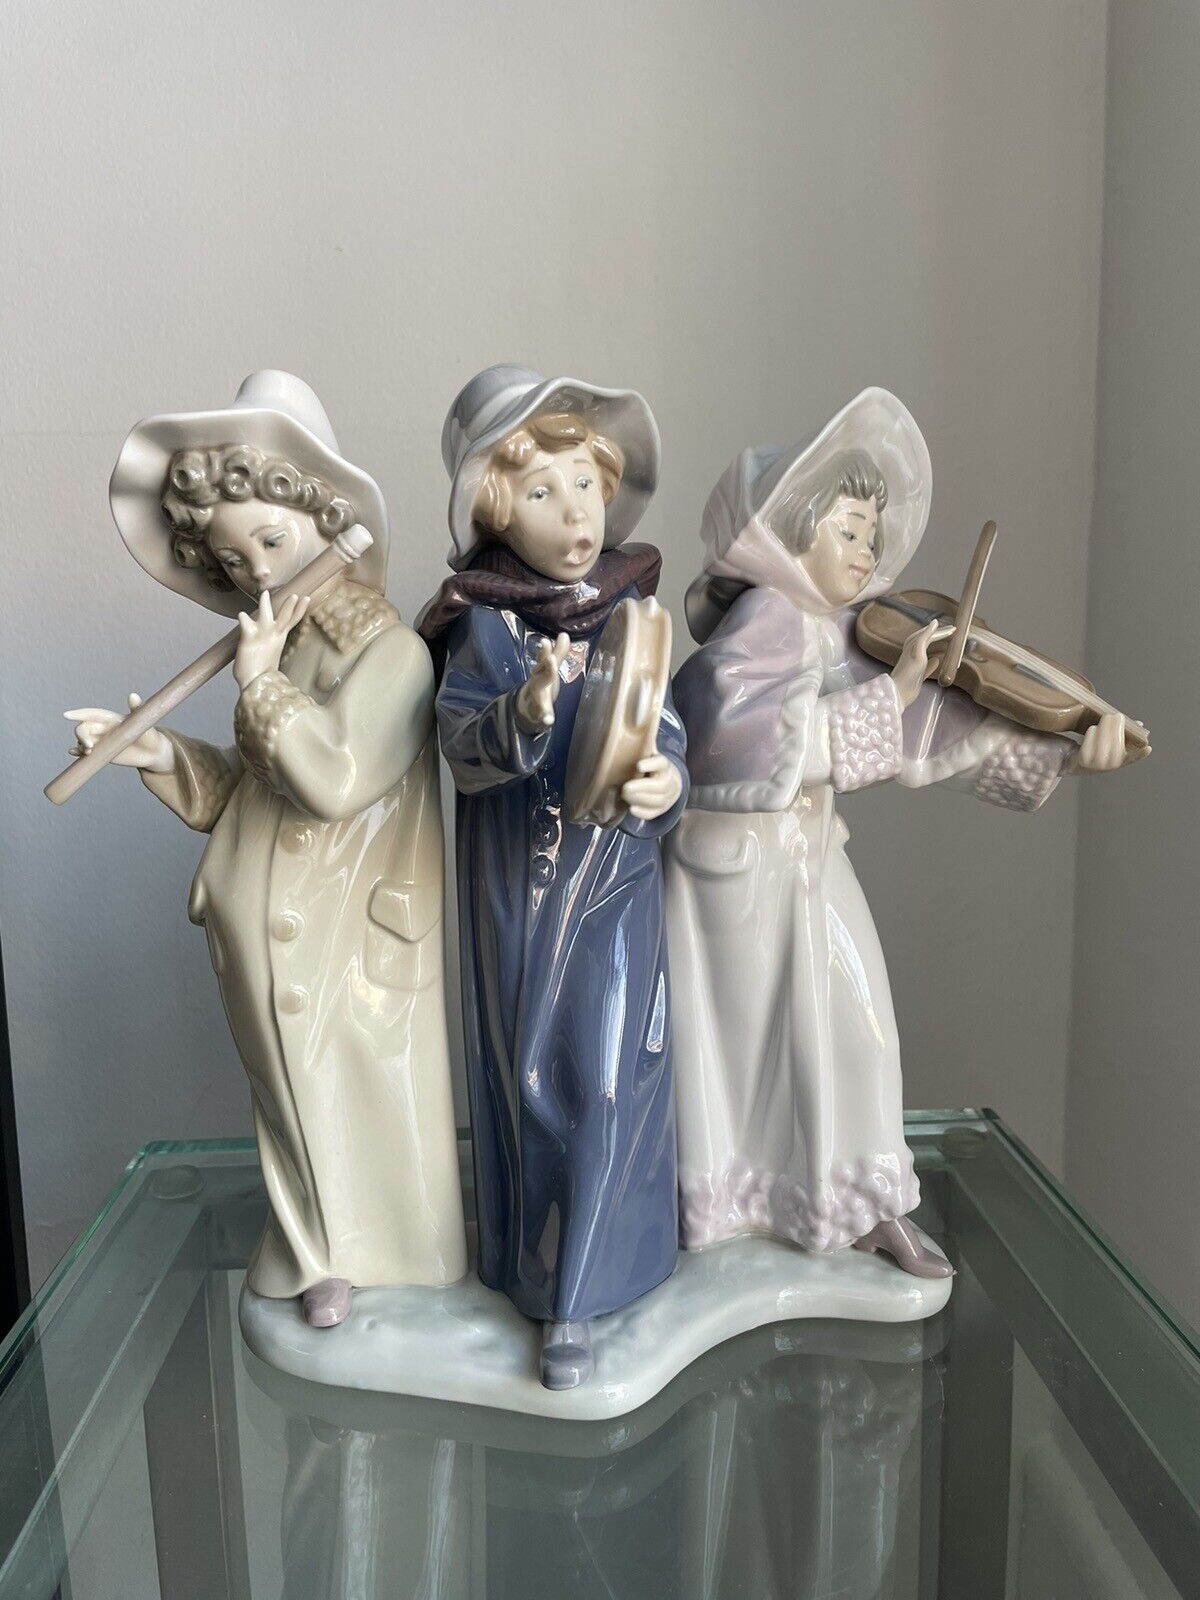 Lladro Collectible Figurine “Young Street Musicians” Rare Figurine